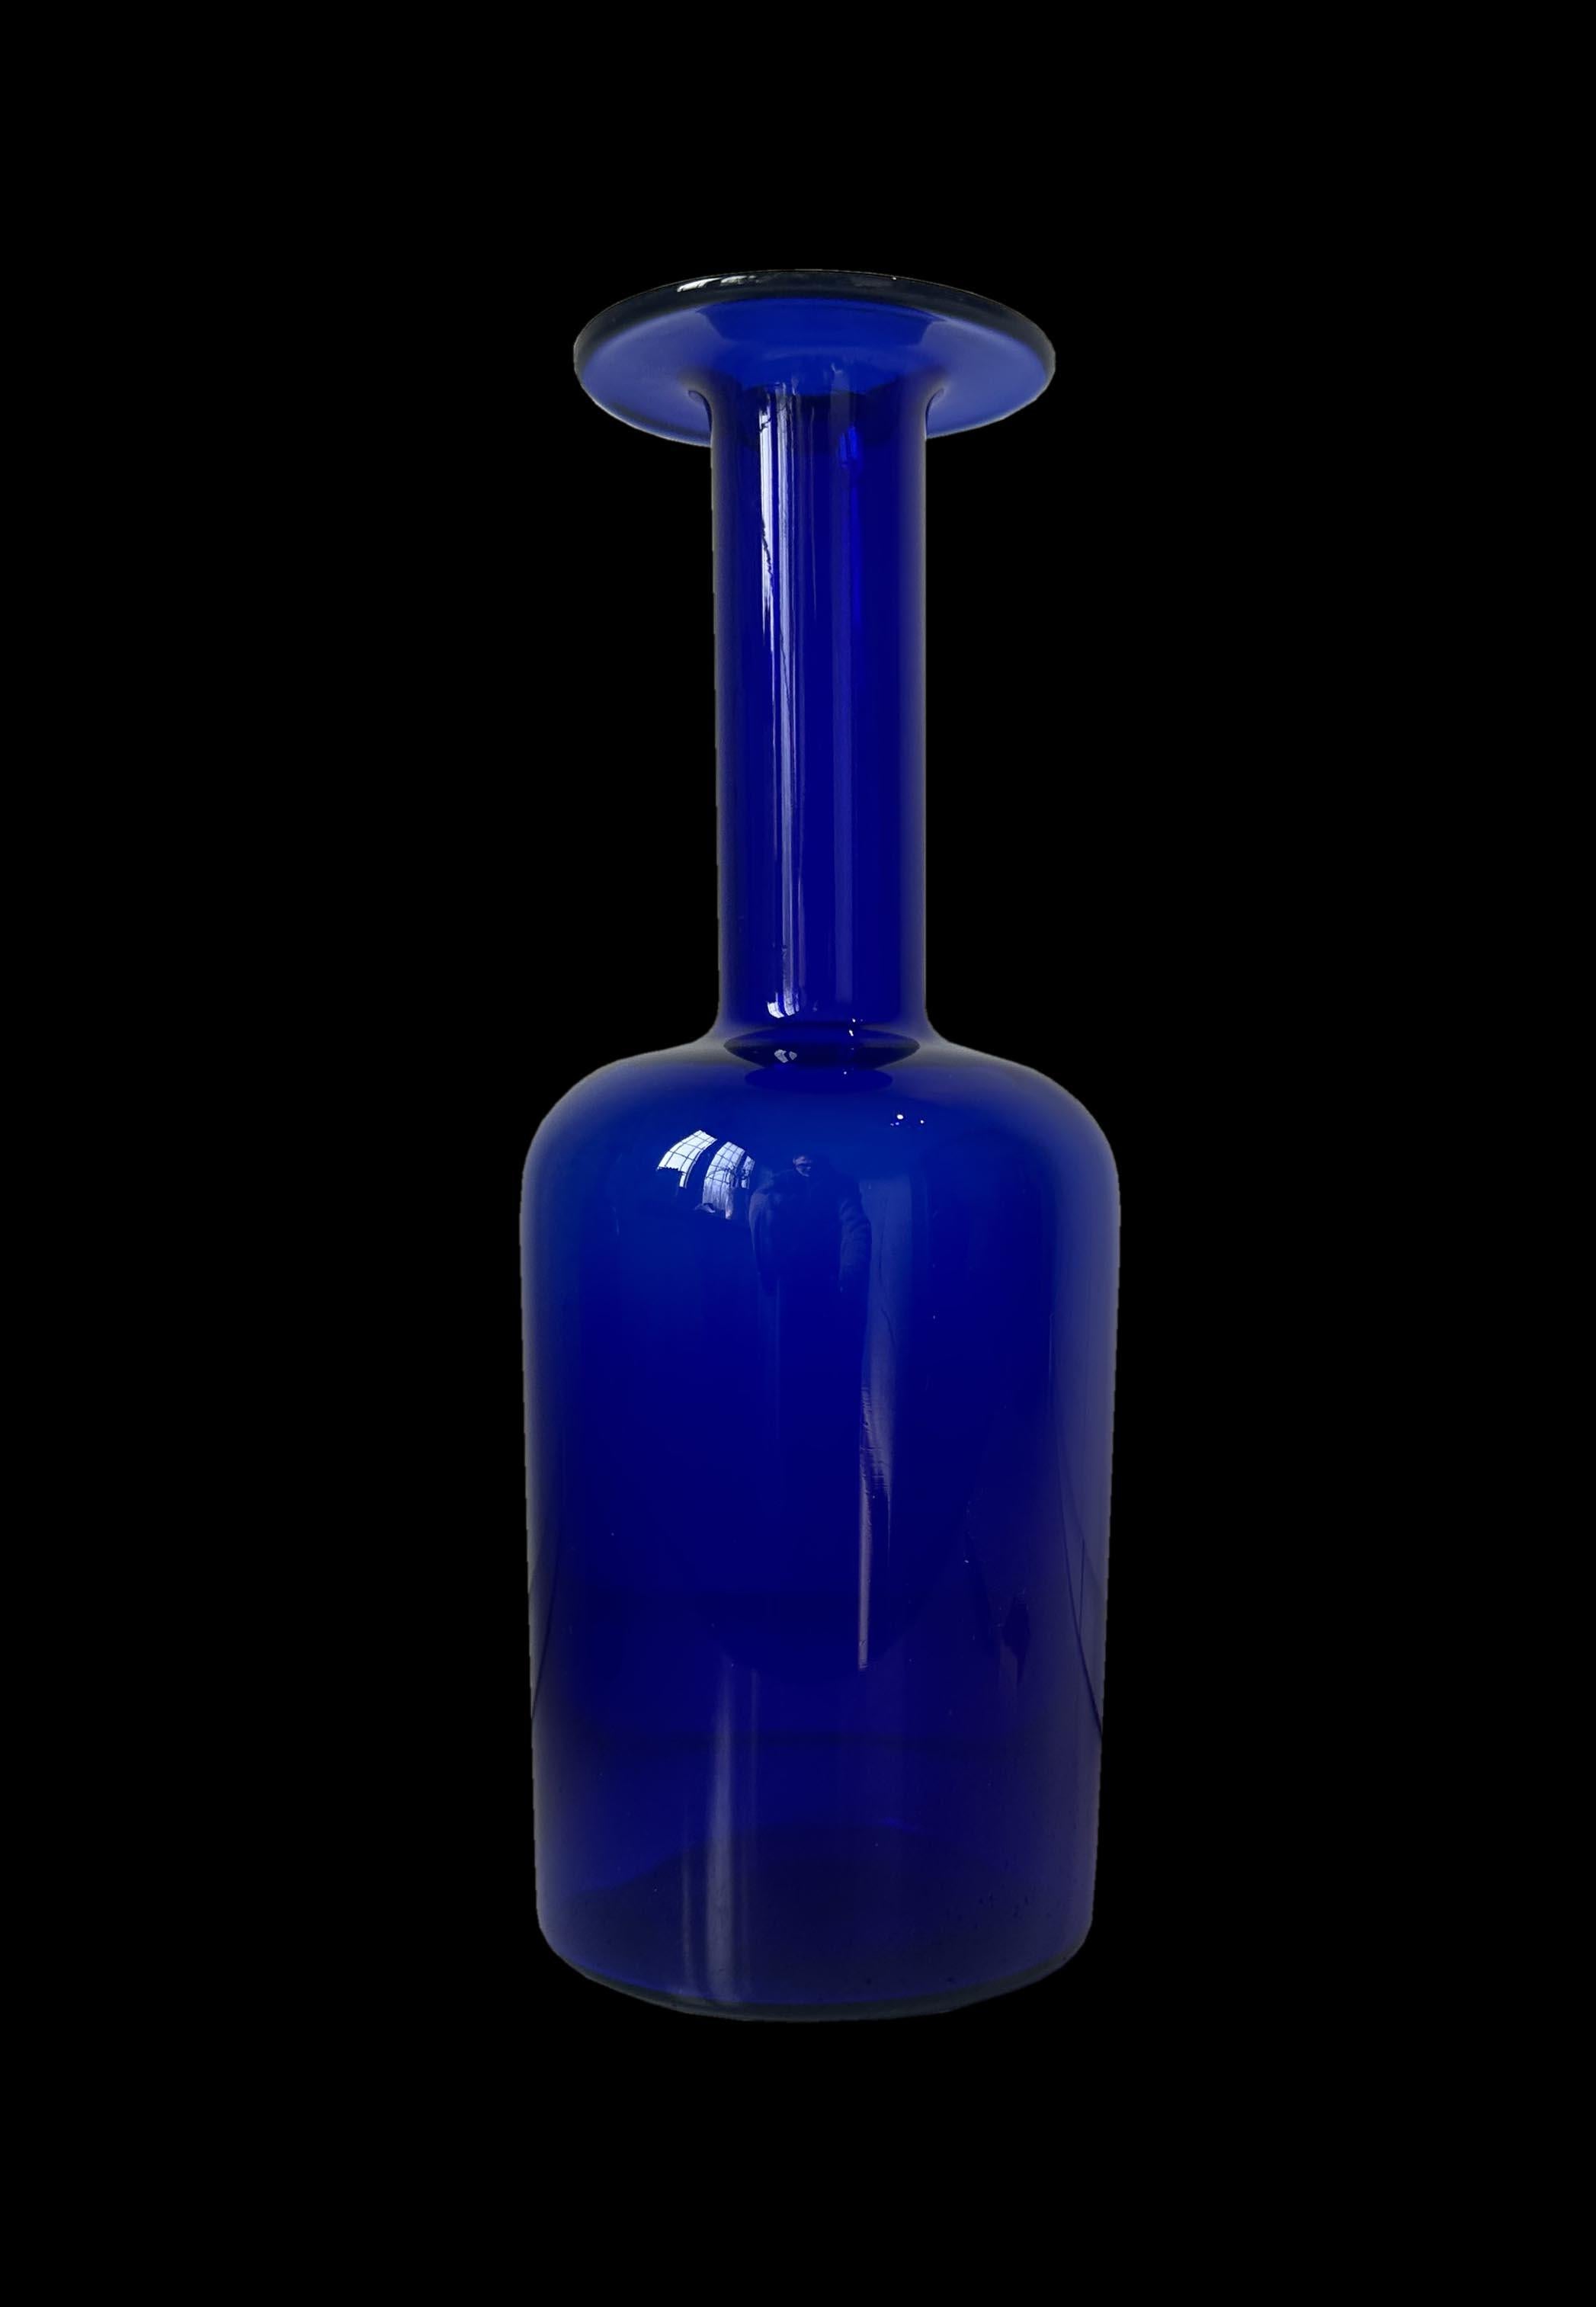 This is a very nice cobalt blue version of the super cool and stylish Gulvase by designer Otto Brauer for Holmegaard, Denmark